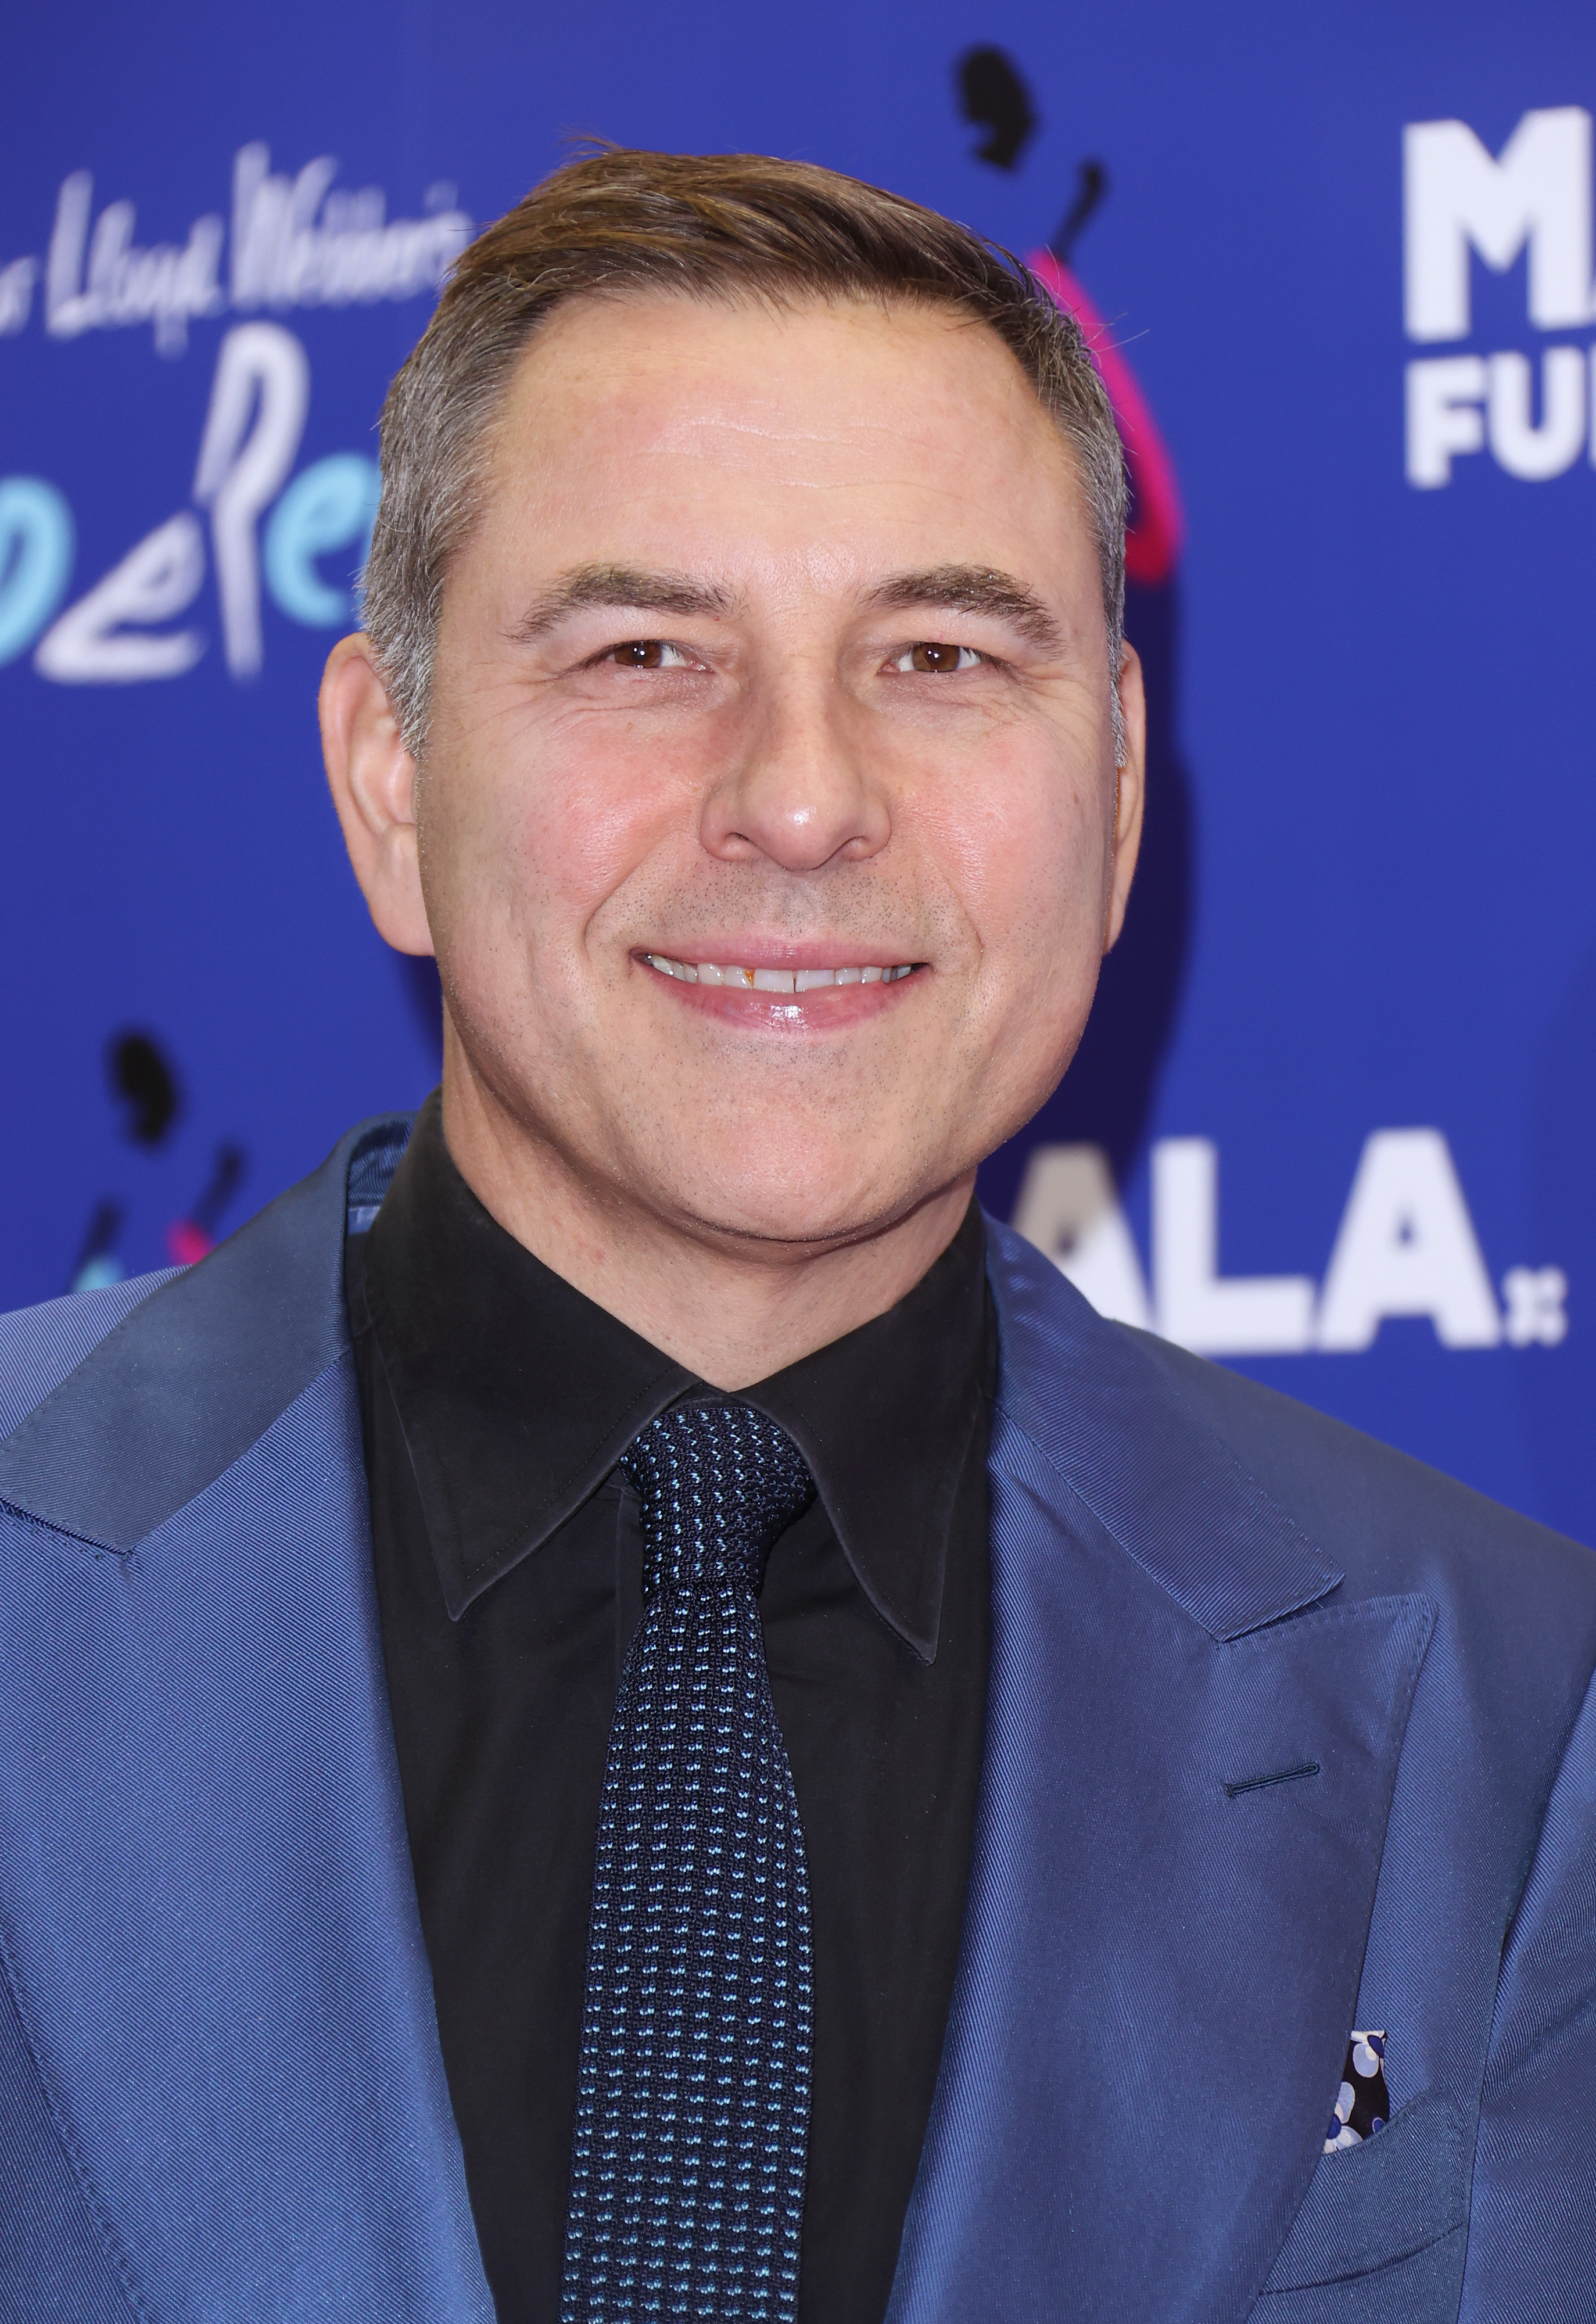 David Walliams caused TV staff to "run for cover" on the Top Gear test track